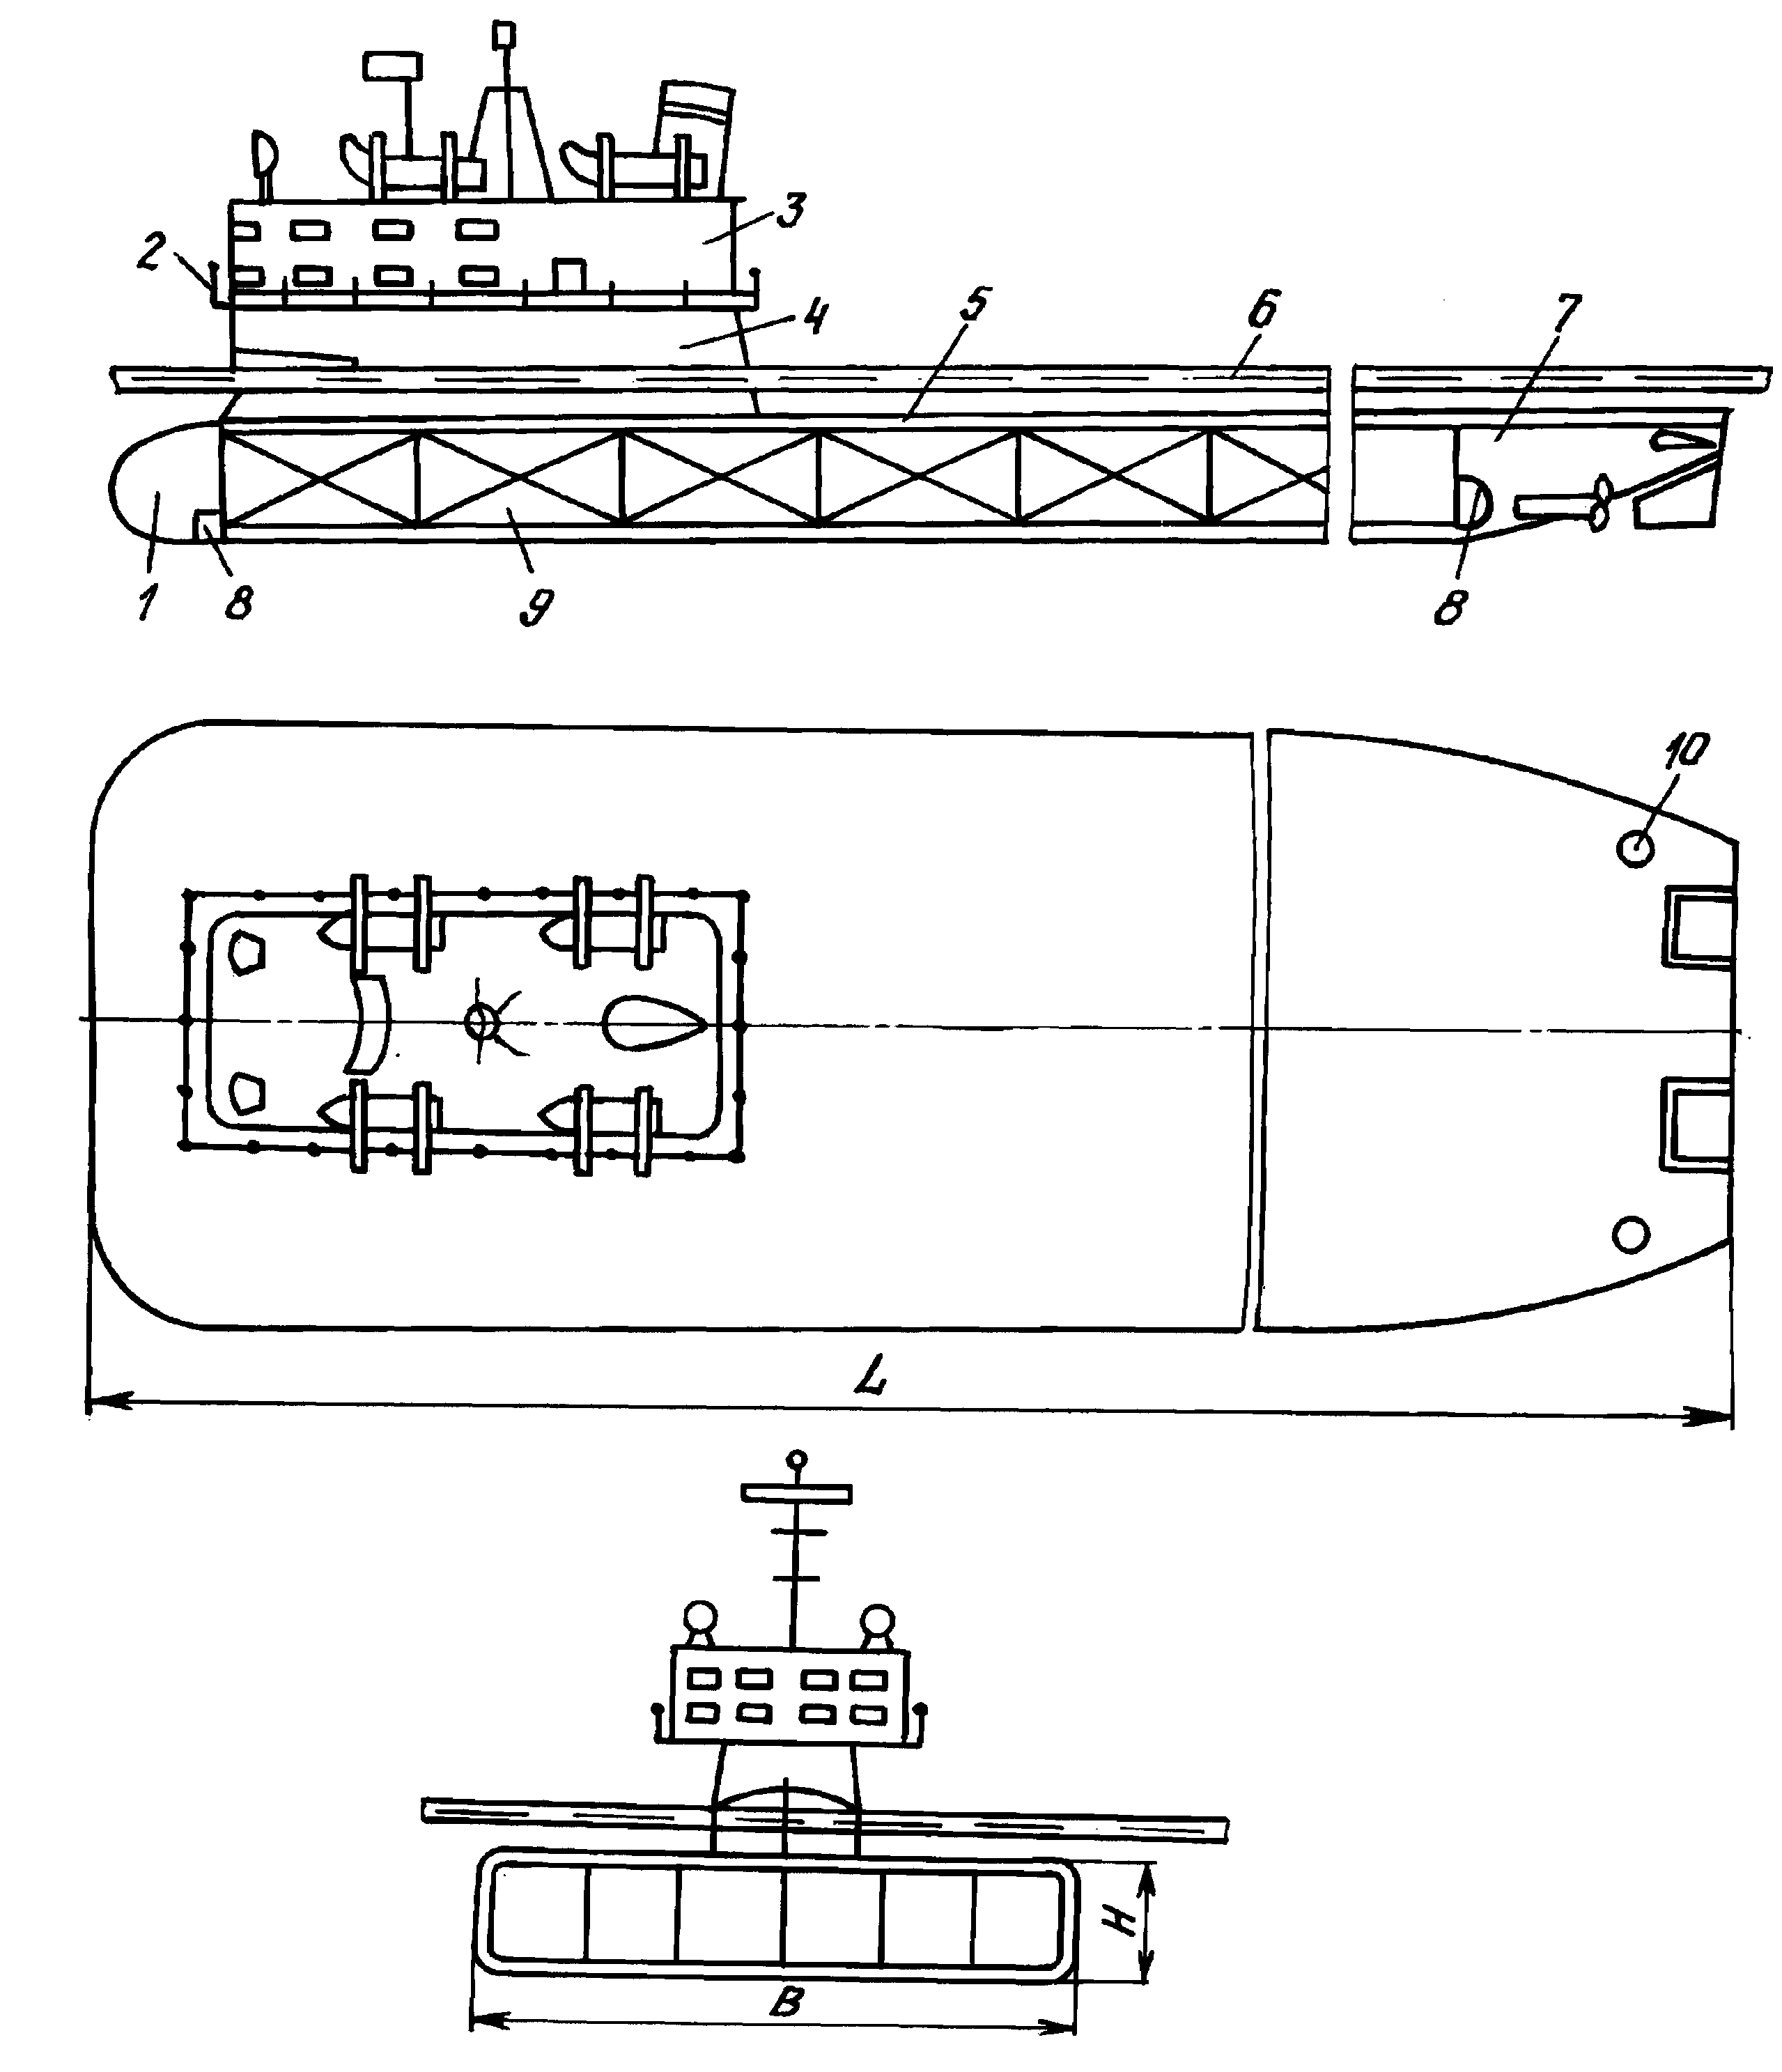 Arctic heavy-tonnage carrier and ice-resistant pylon for connecting the ship underwater and above-water bodies